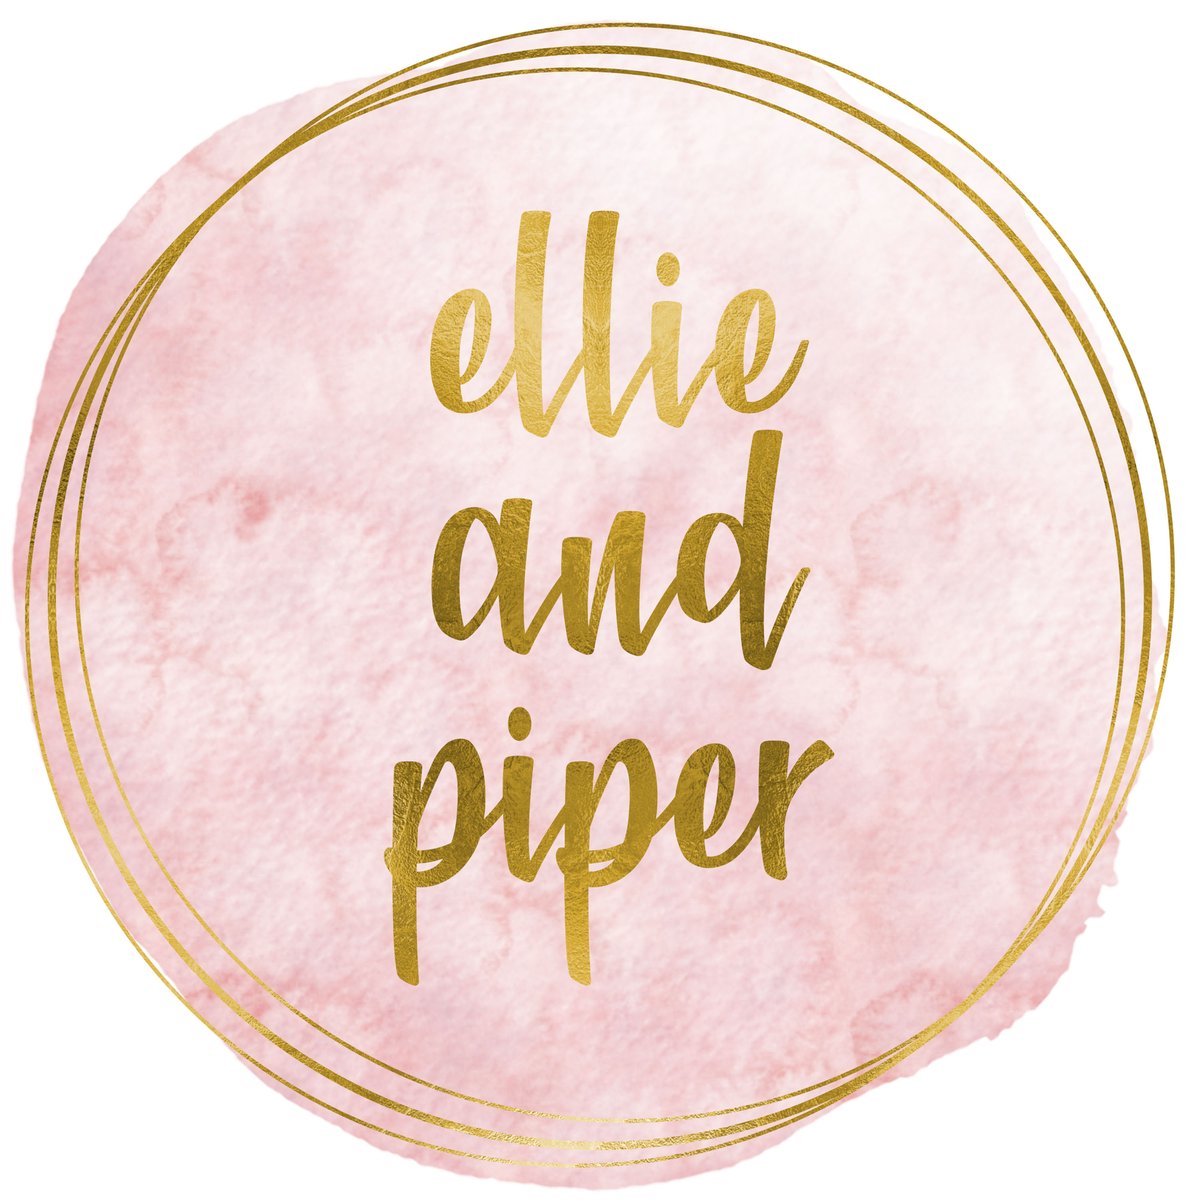 Ellie And Piper coupons and promo codes